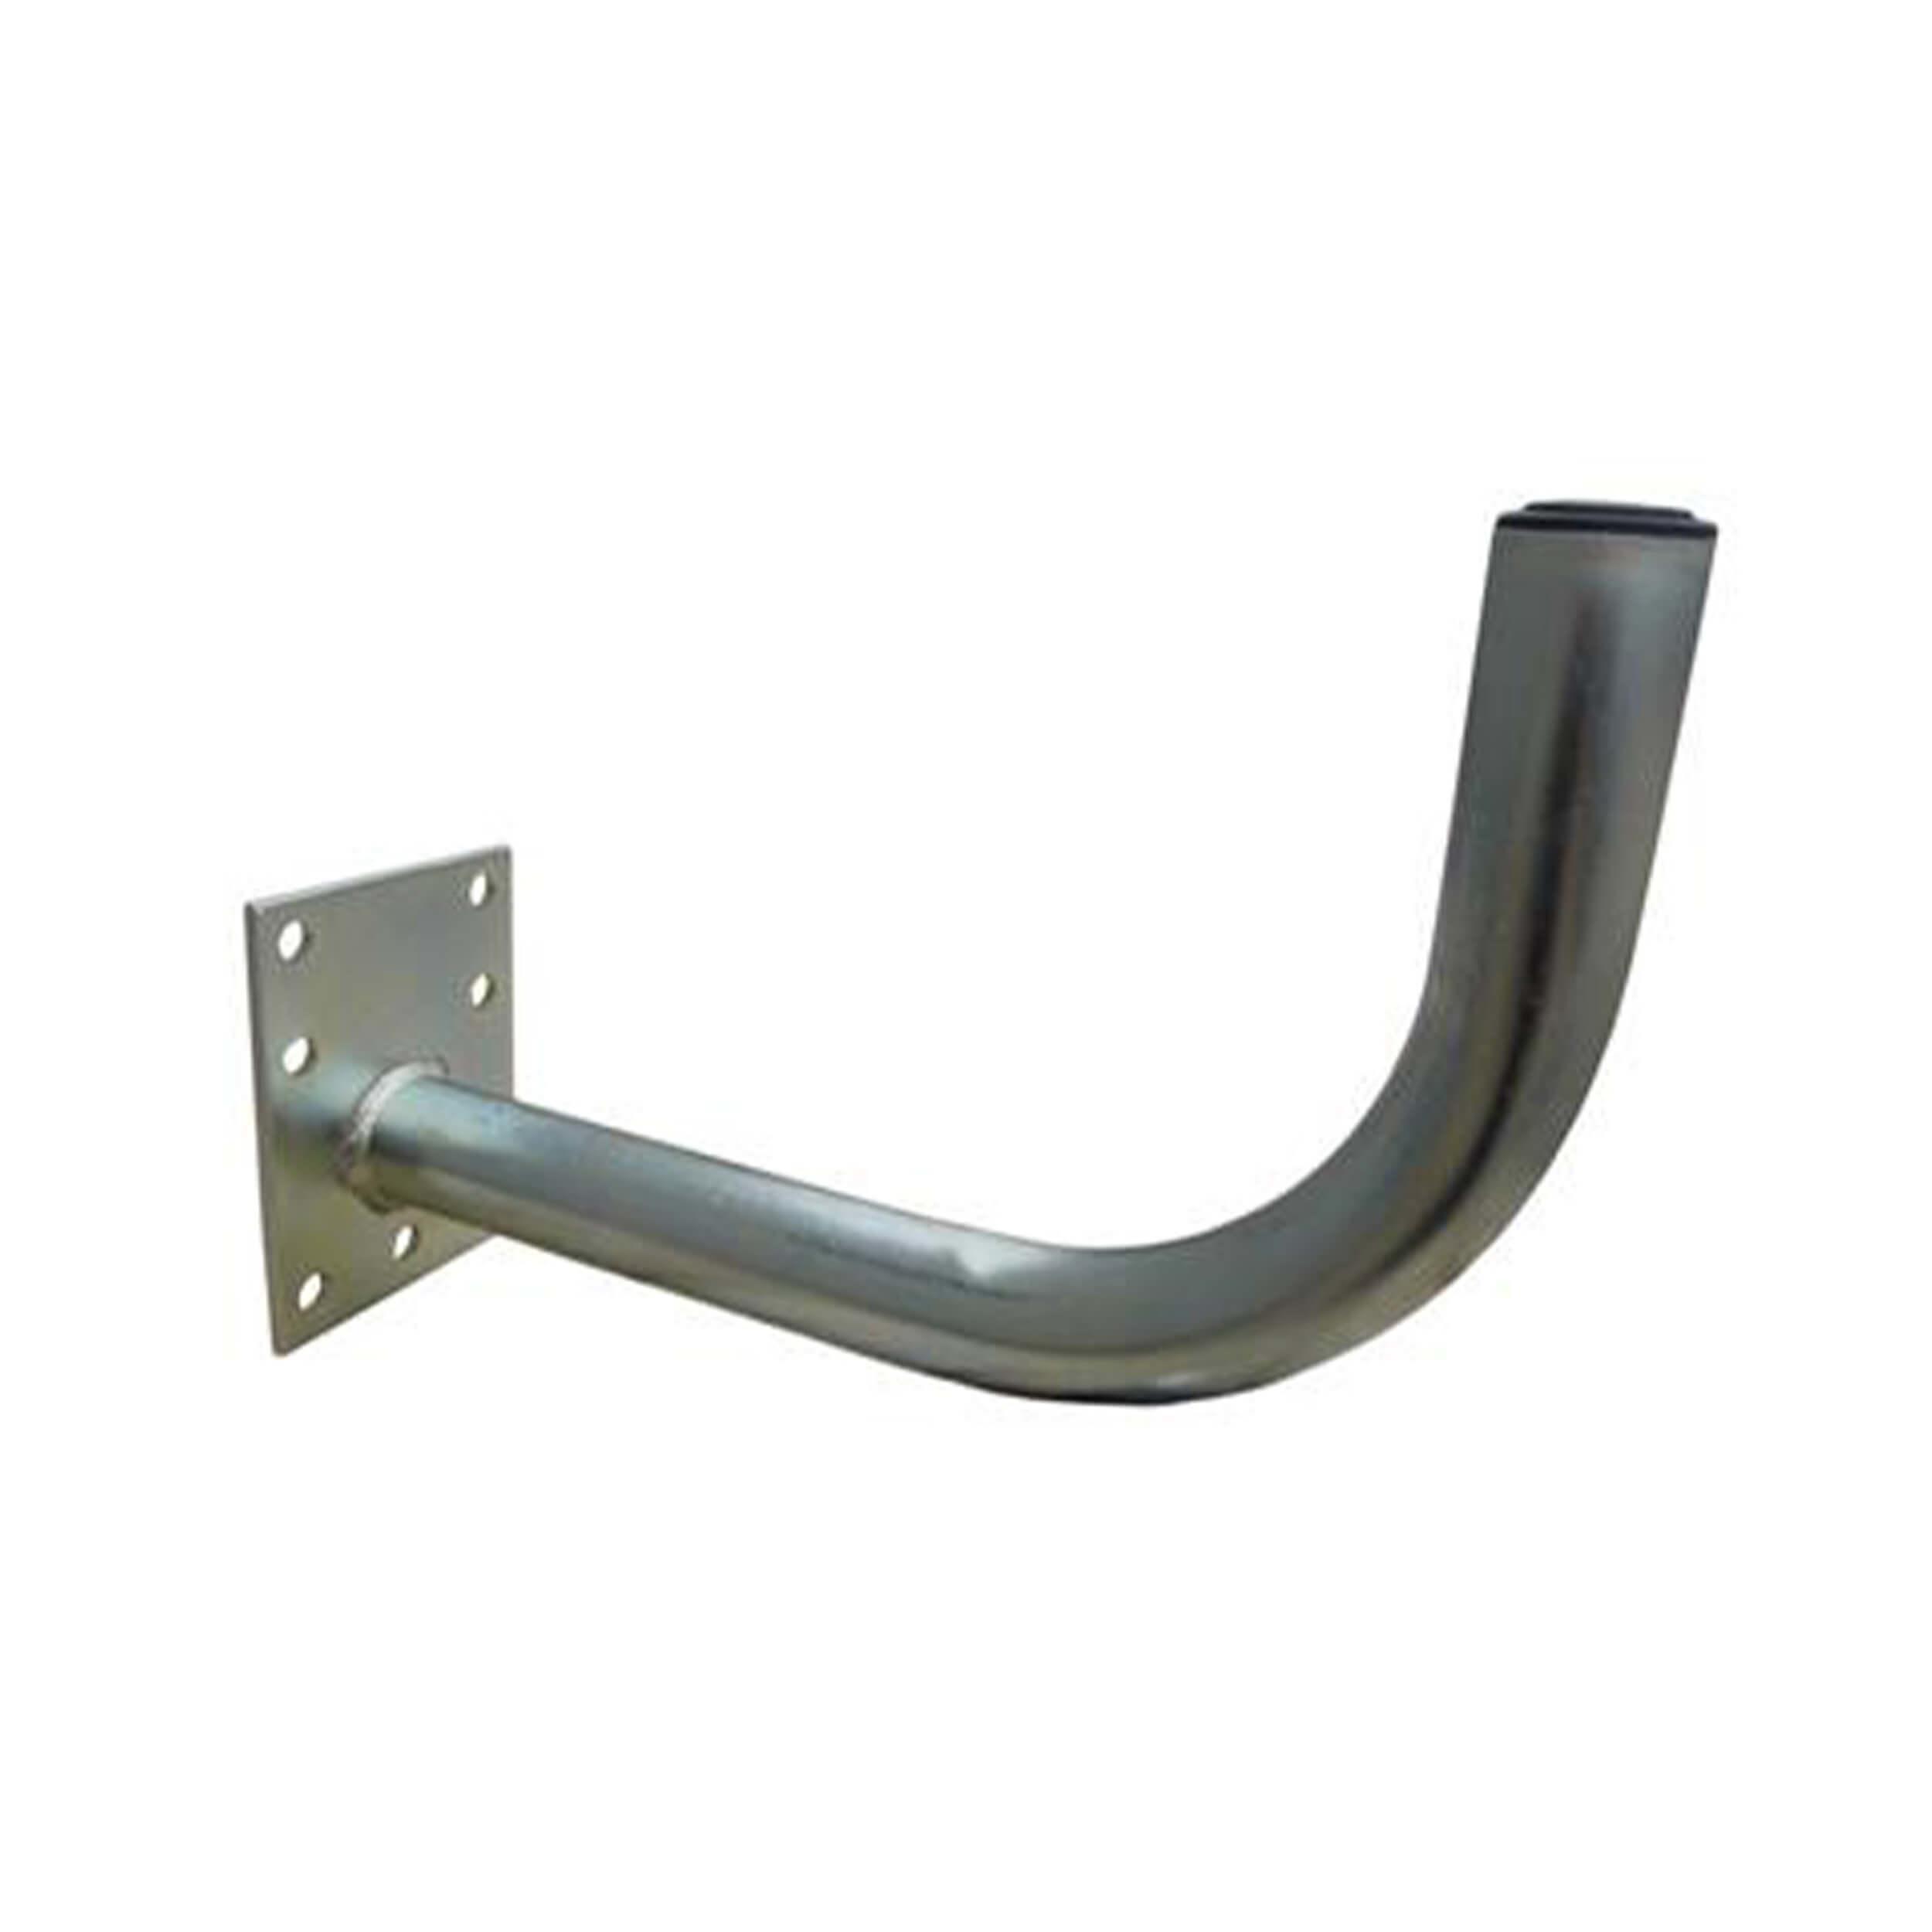 Satellite Wall Mount Bracket - L Shape for 60-80cm Dishes